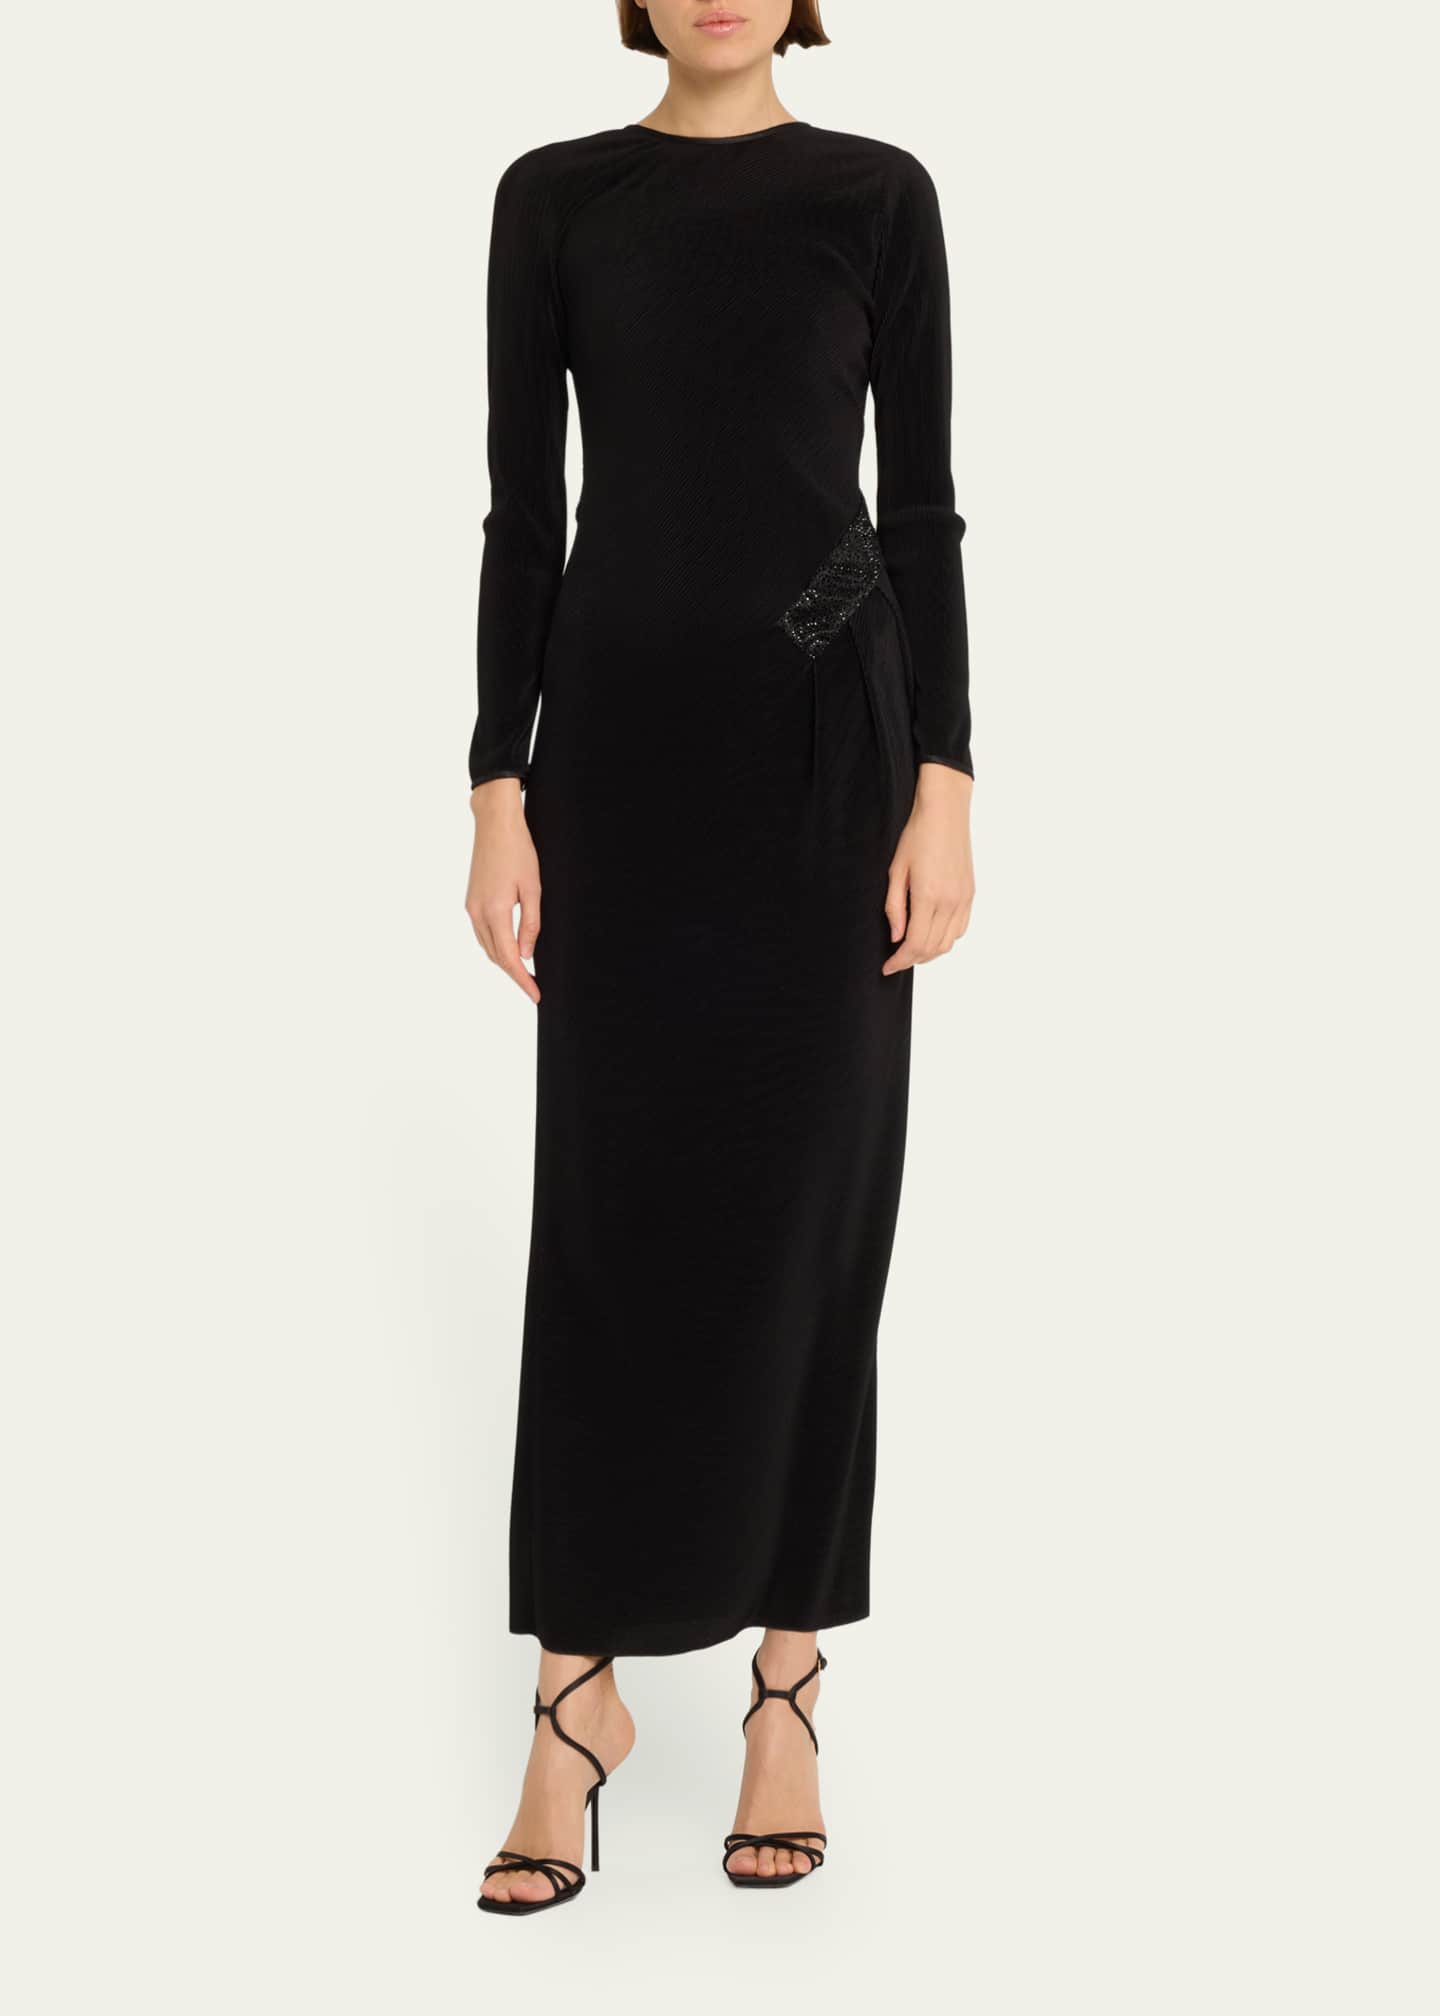 Giorgio Armani Plisse Jersey Gown with Beaded Hip Detail - Bergdorf Goodman